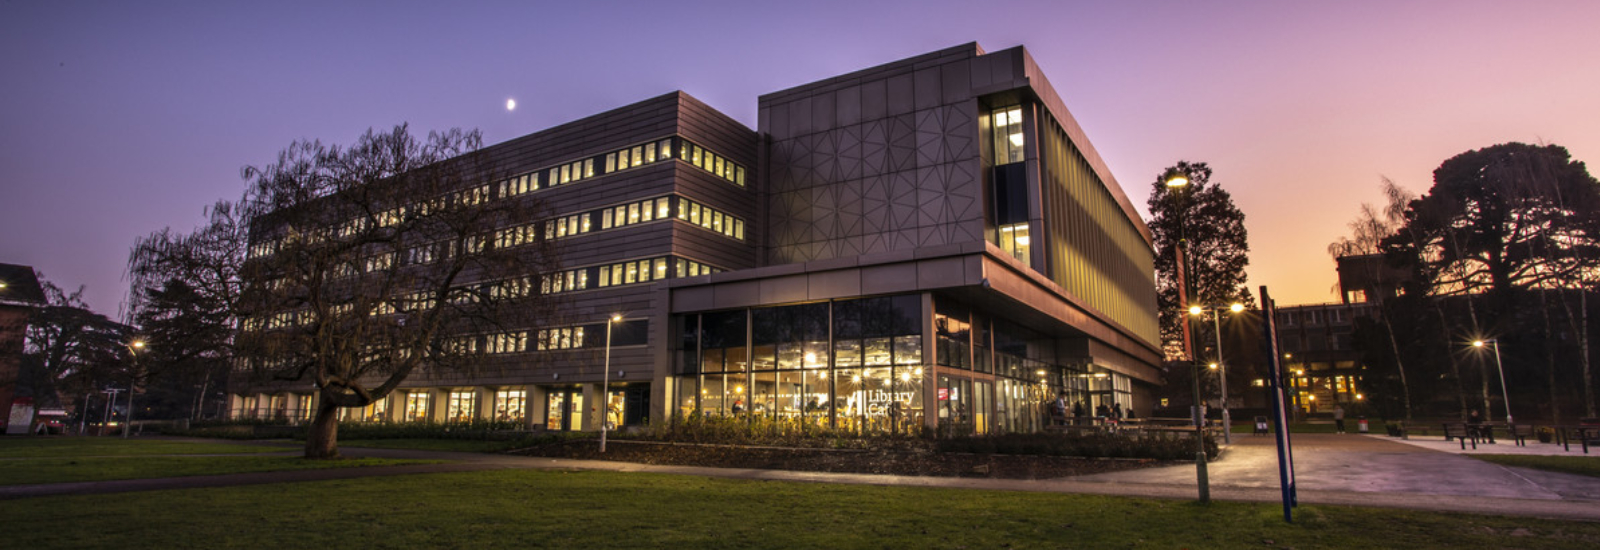 The University of Reading Library at night